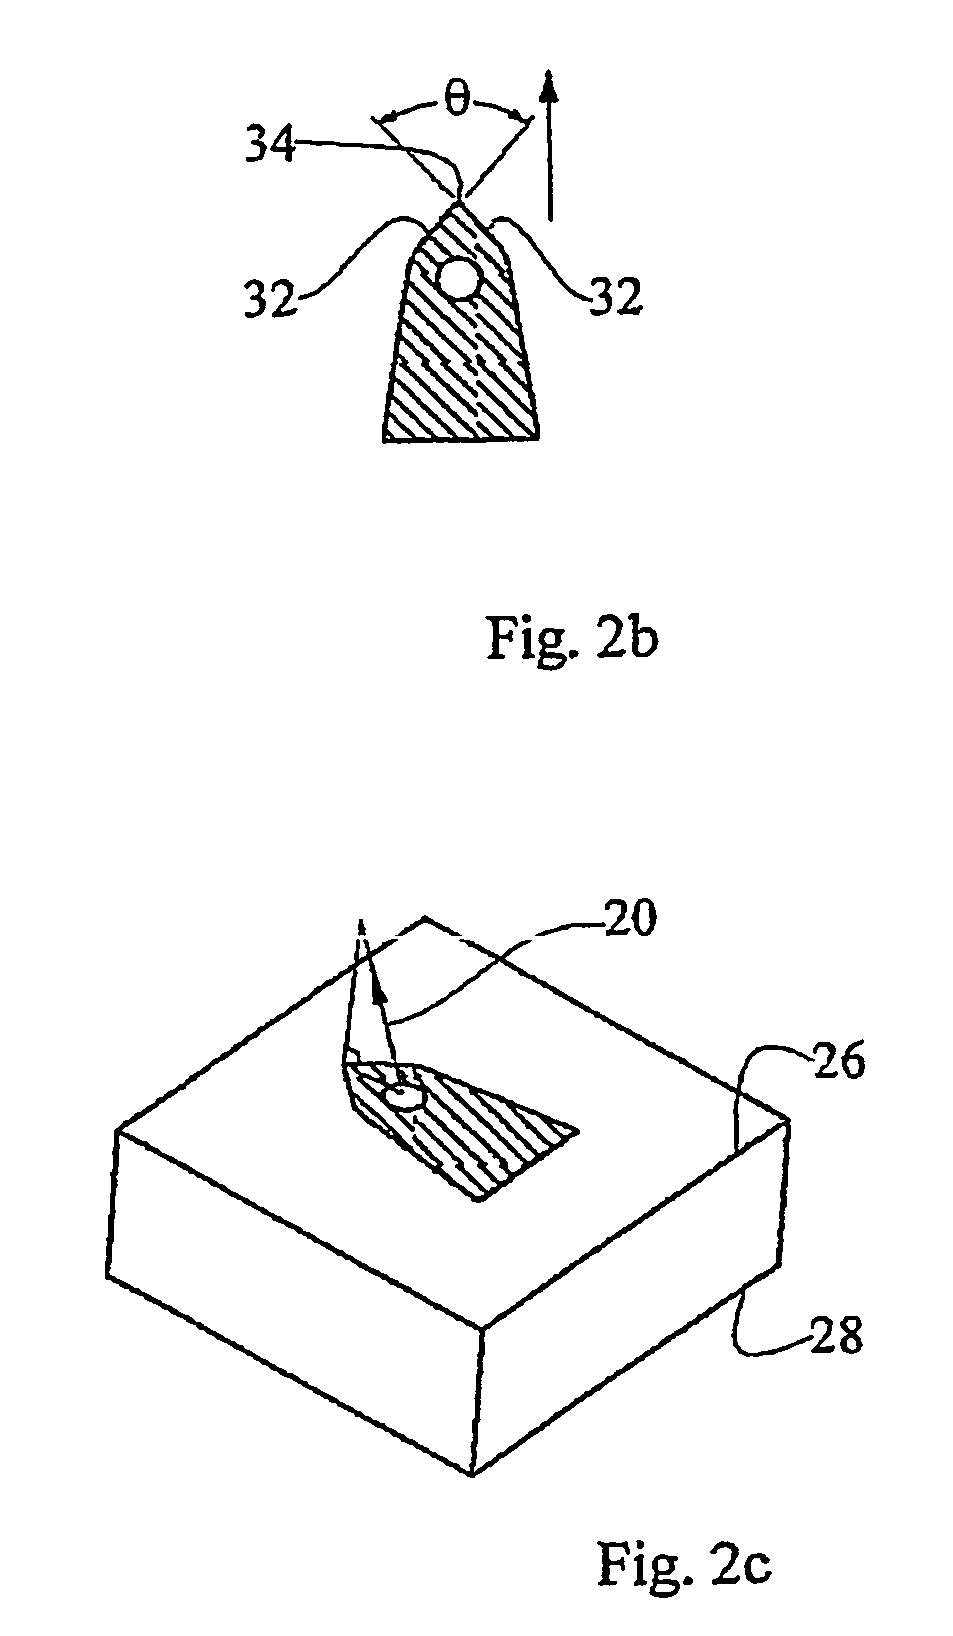 Enhanced penetration system and method for sliding microneedles